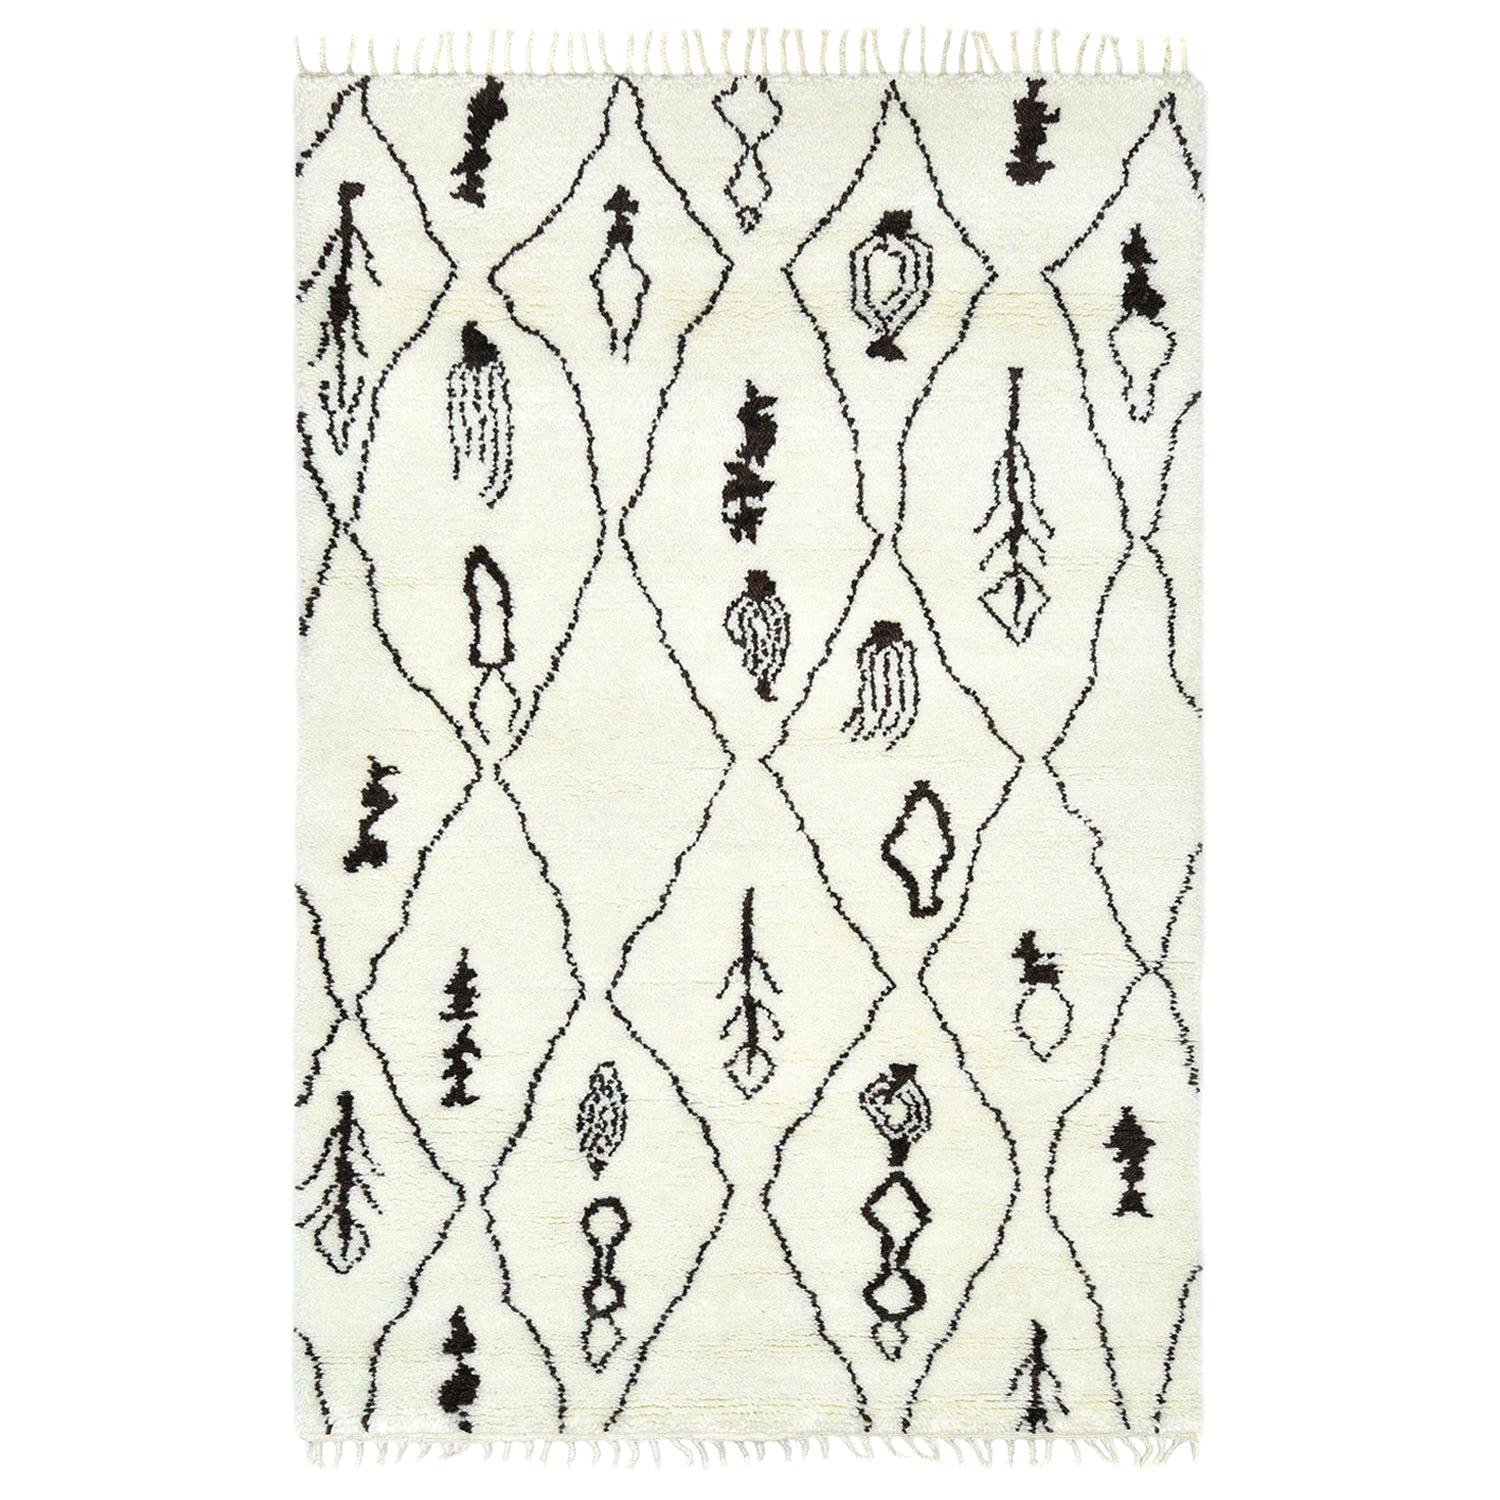 Indian Made Hand-Knotted Bohemian Moroccan Inspired Area Rug